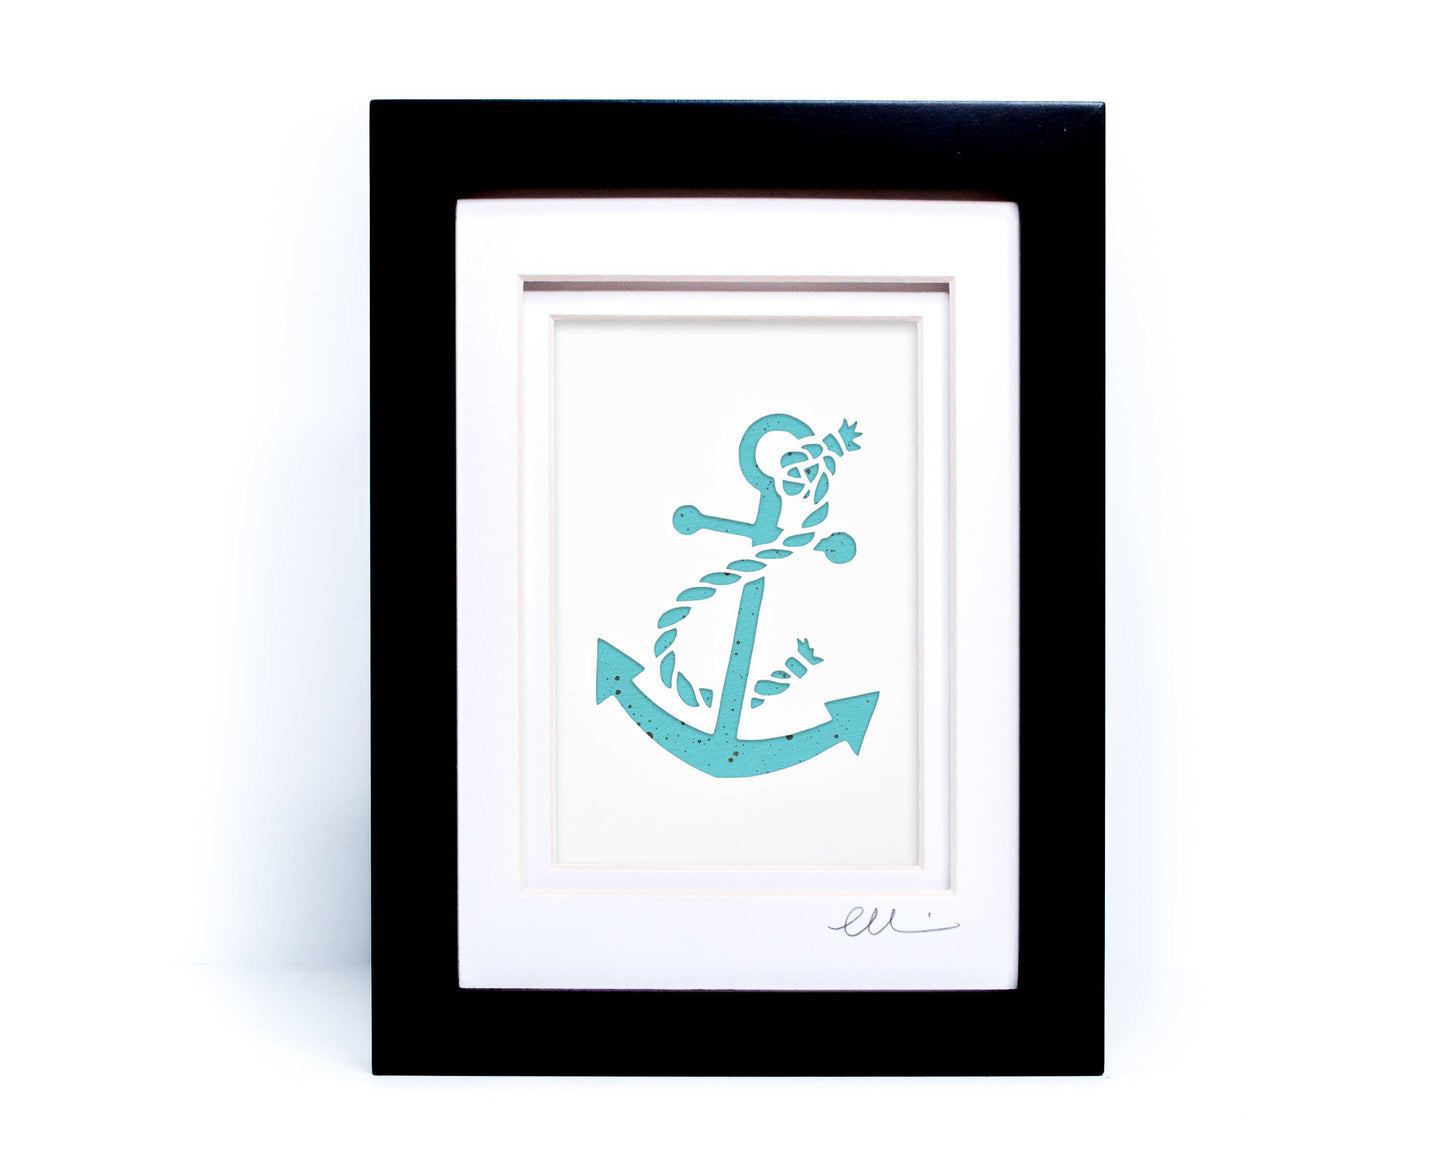 White nautical anchor twisted with rope papercut on hand painted teal background.